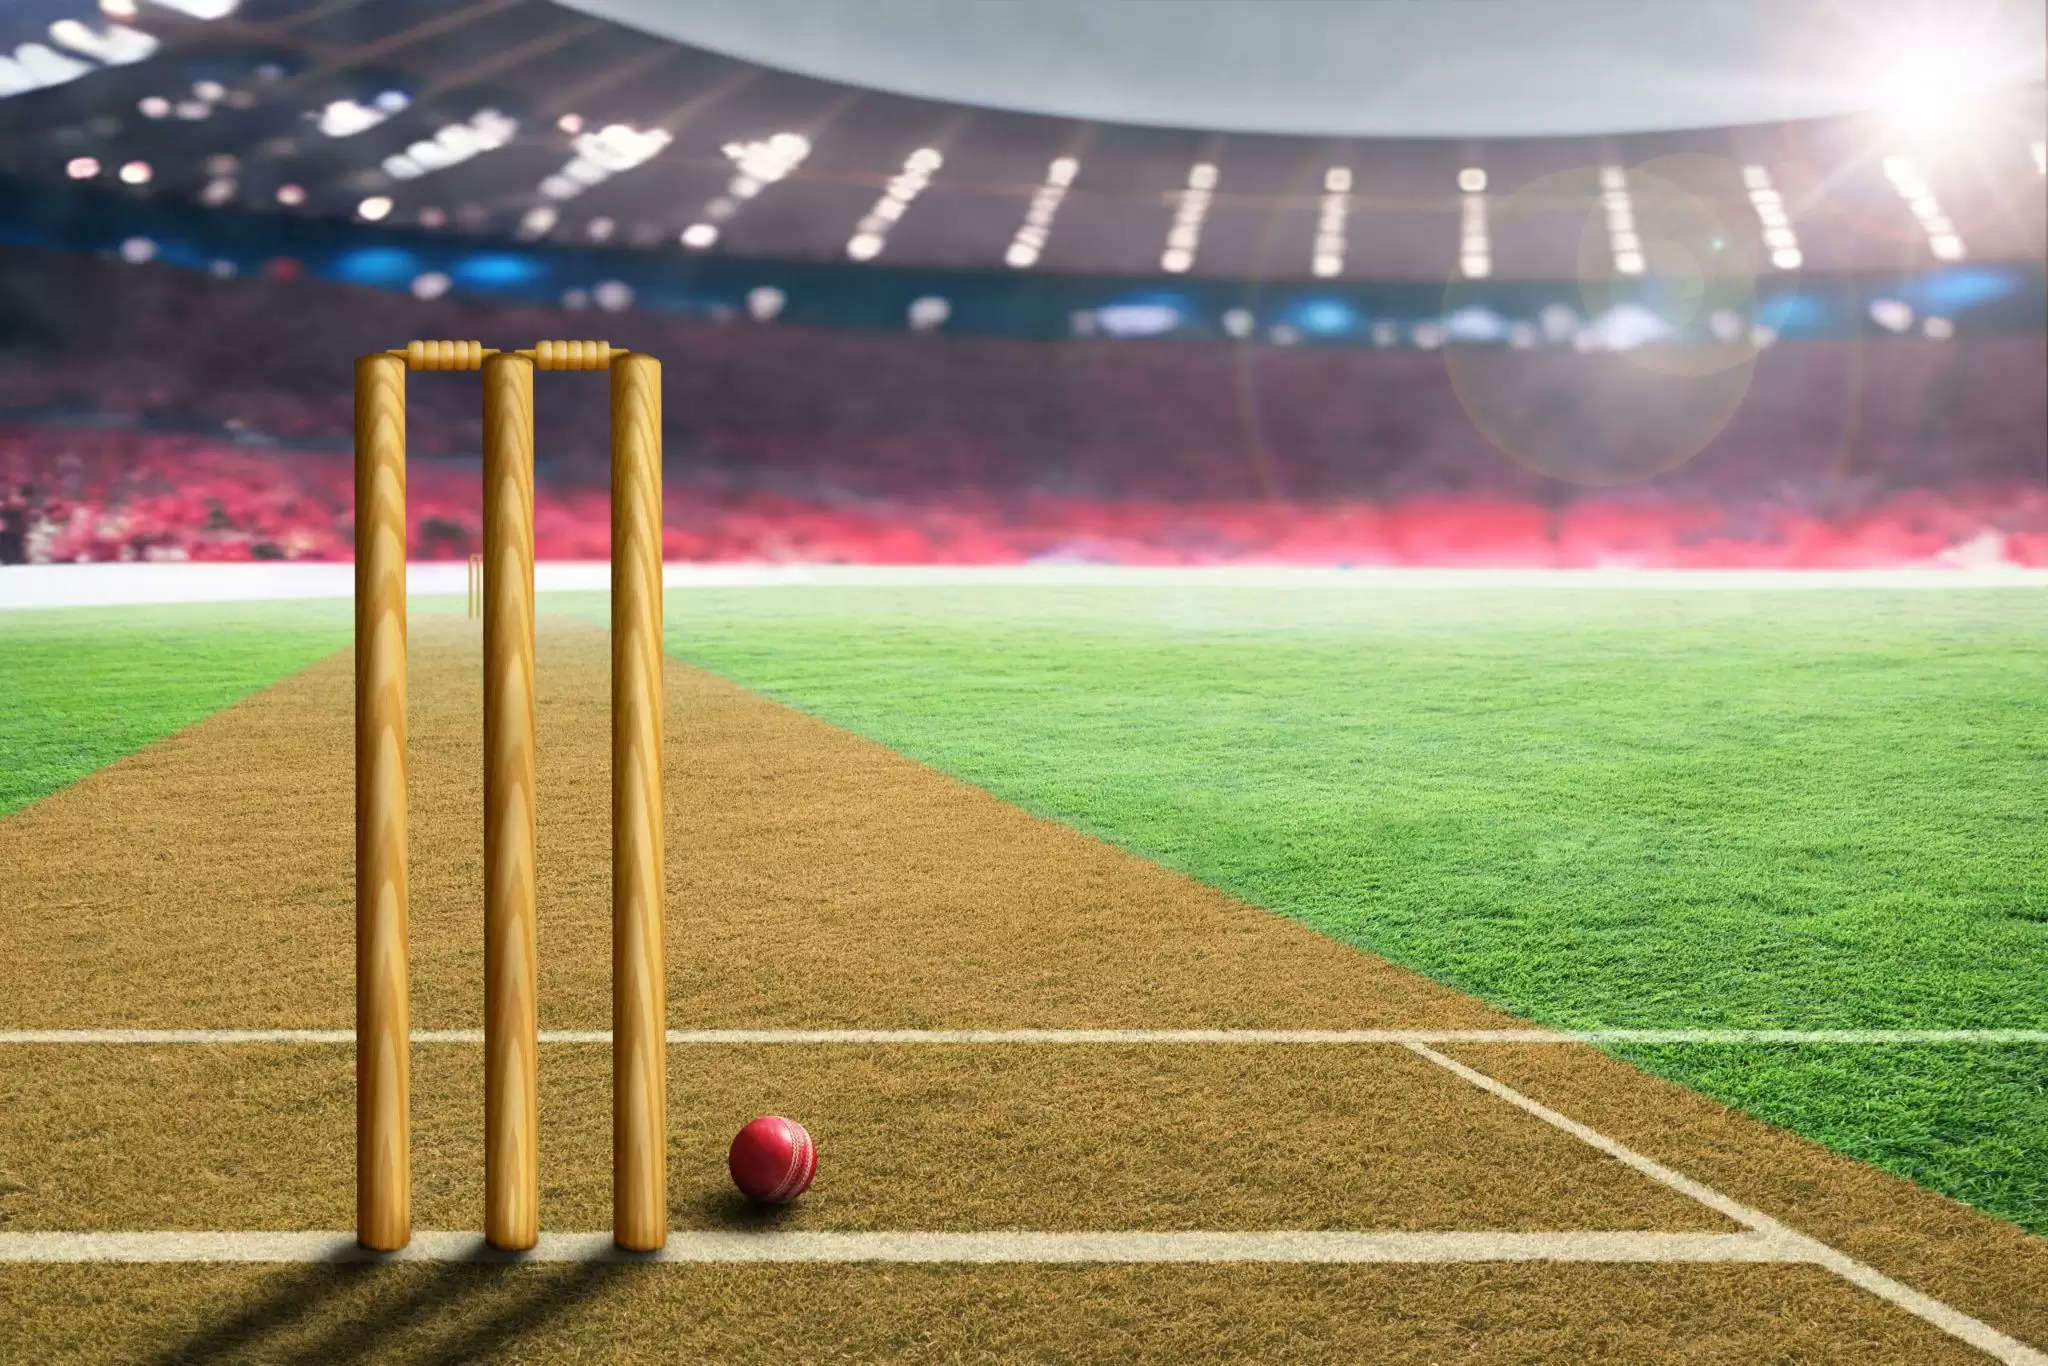 From Carpet to Stadium: The Cricket Field Revolution That Changed the Game